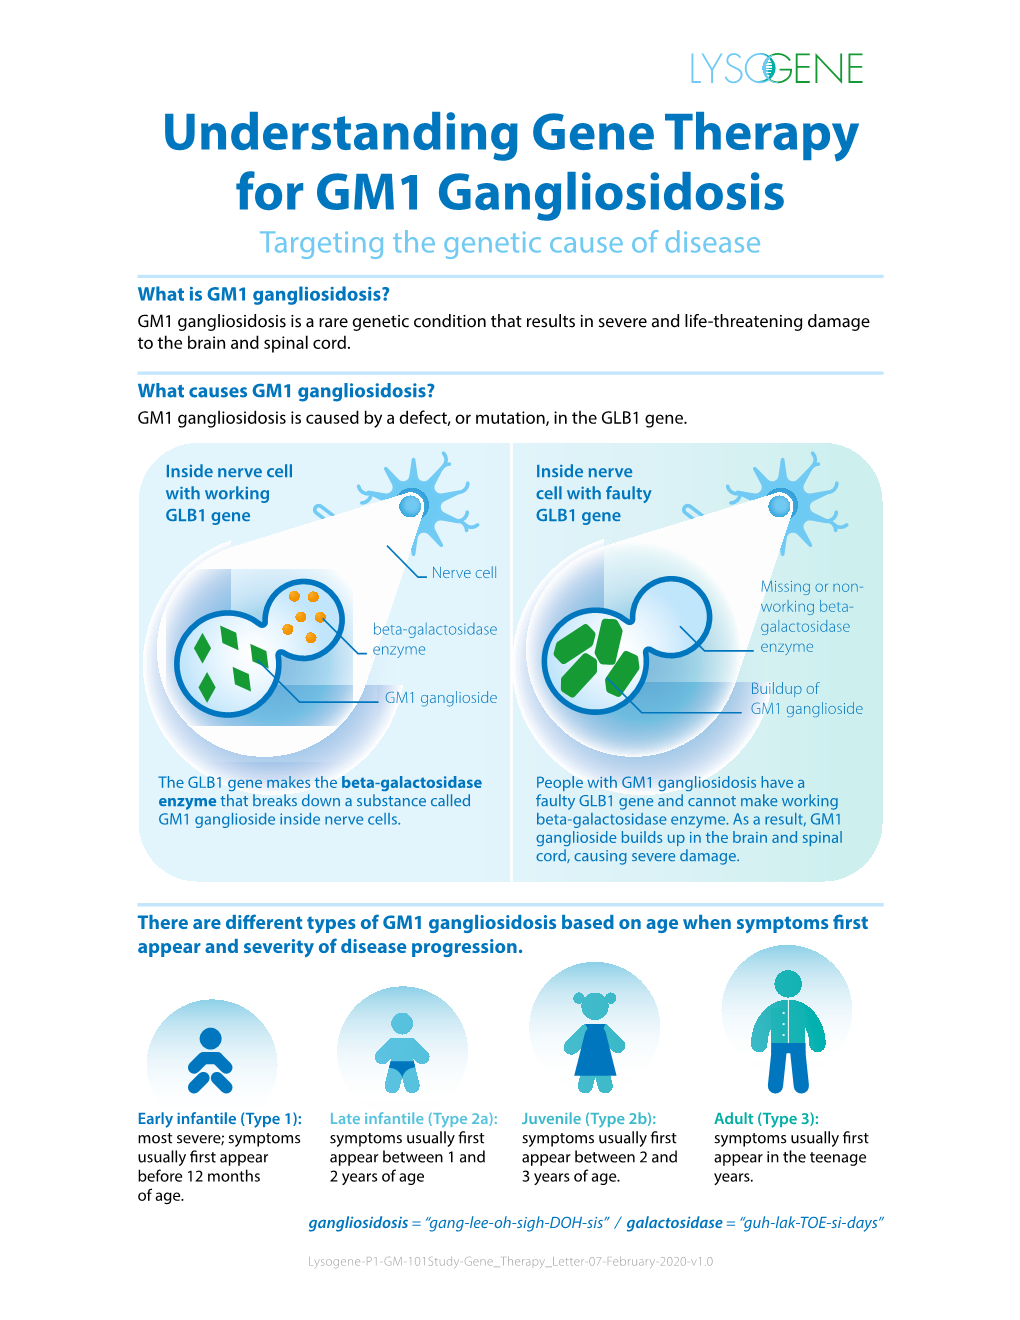 Understanding Gene Therapy for GM1 Gangliosidosis Targeting the Genetic Cause of Disease